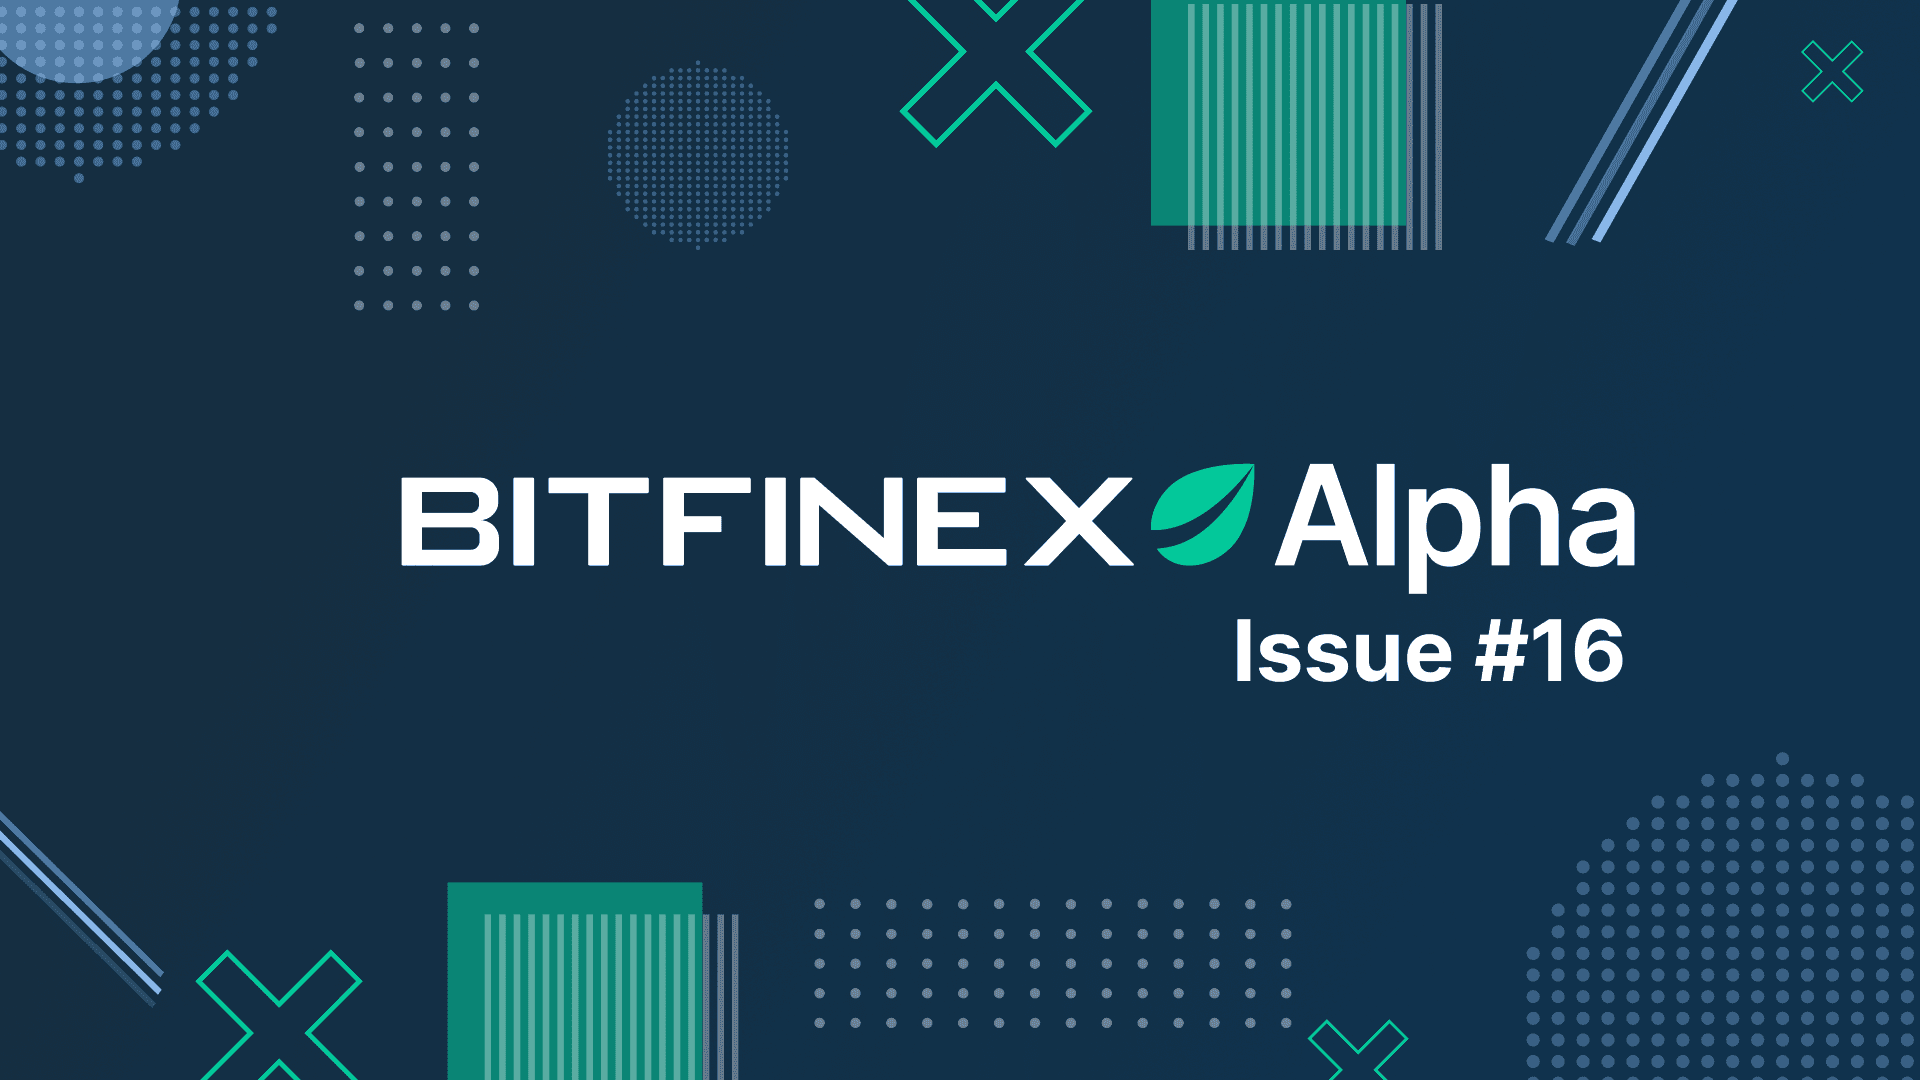 Bitfinex Alpha | Market is flooded with new jobs, Crypto Pump incoming too?